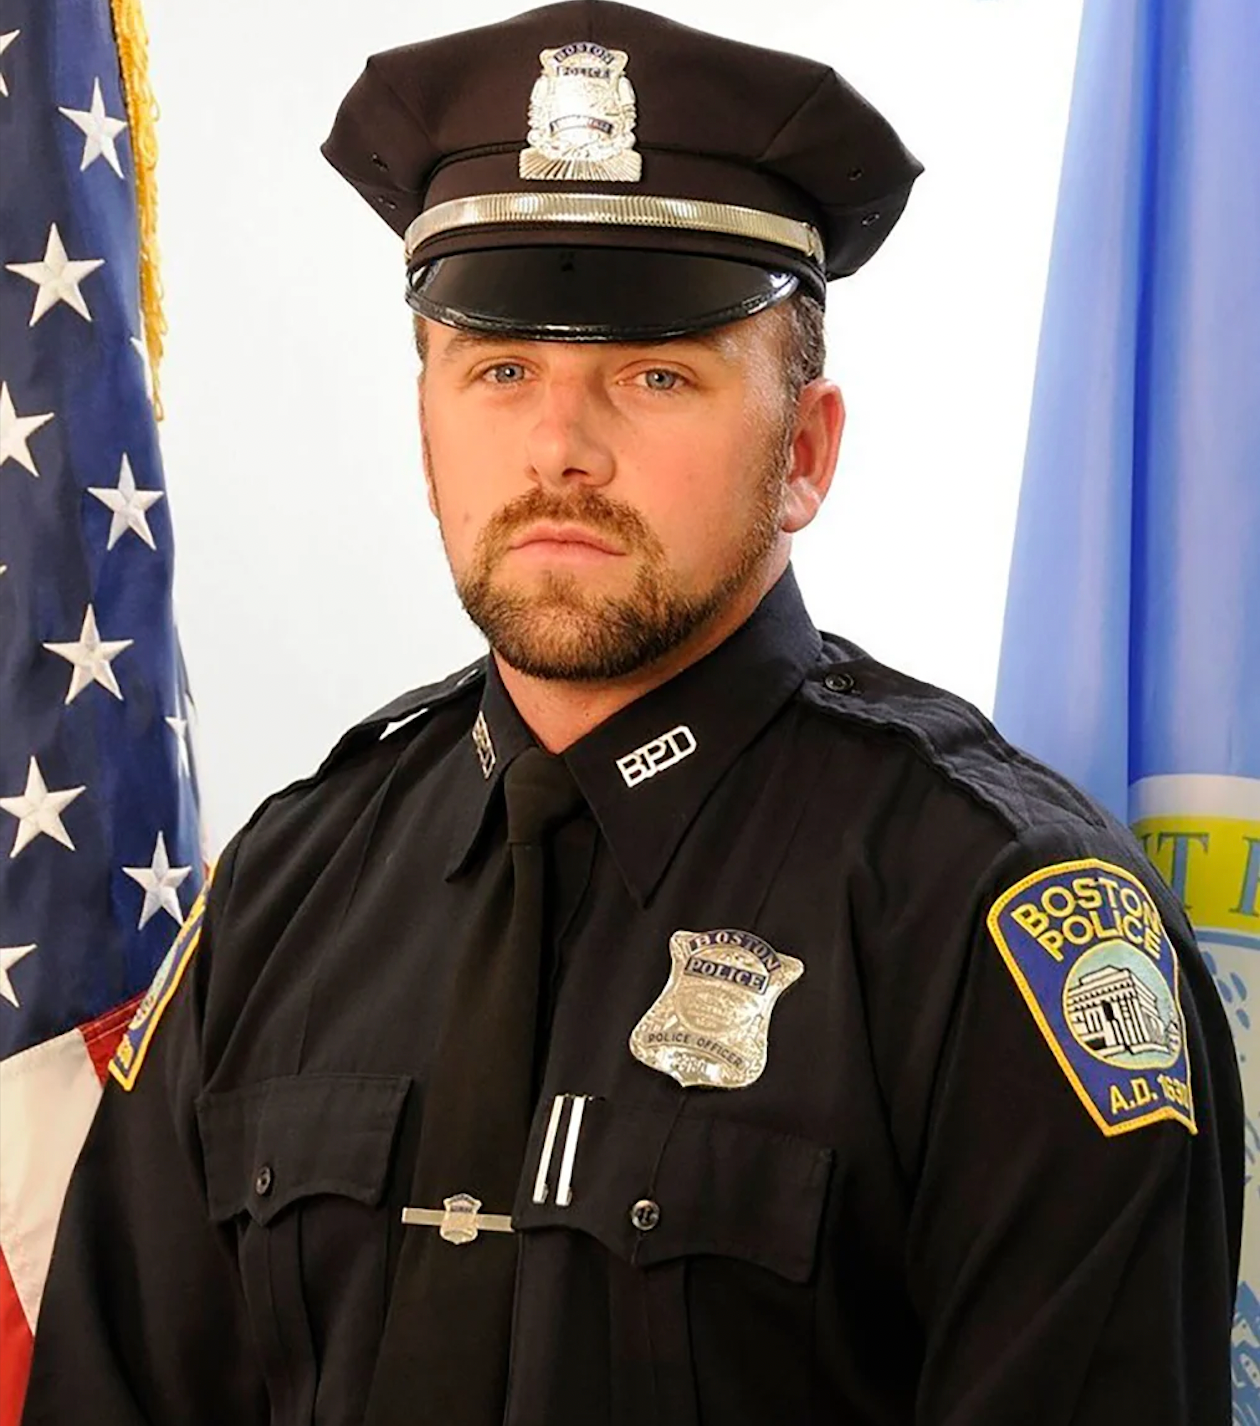 The body of 46-year-old O’Keefe, a Boston police officer, was found in the early morning hours of January 29, 2022, outside a home in Canton, Massachusetts. An autopsy found he died of hypothermia and blunt force trauma